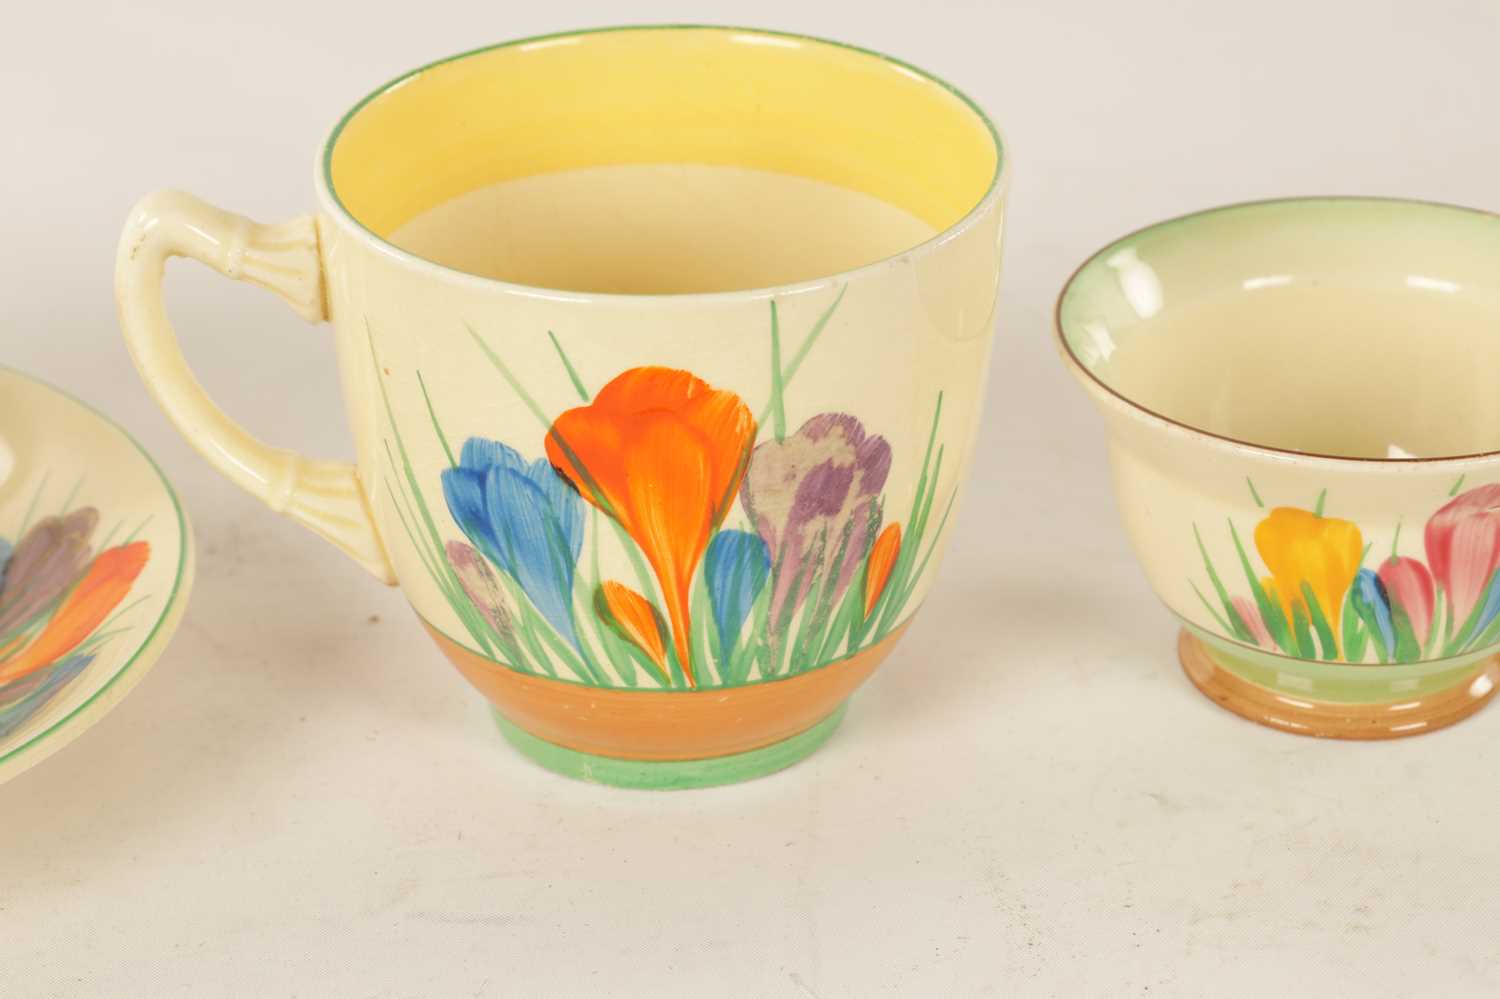 A COLLECTION OF CLARICE CLIFF “CROCUS” PATTERN POTTERY - Image 8 of 11